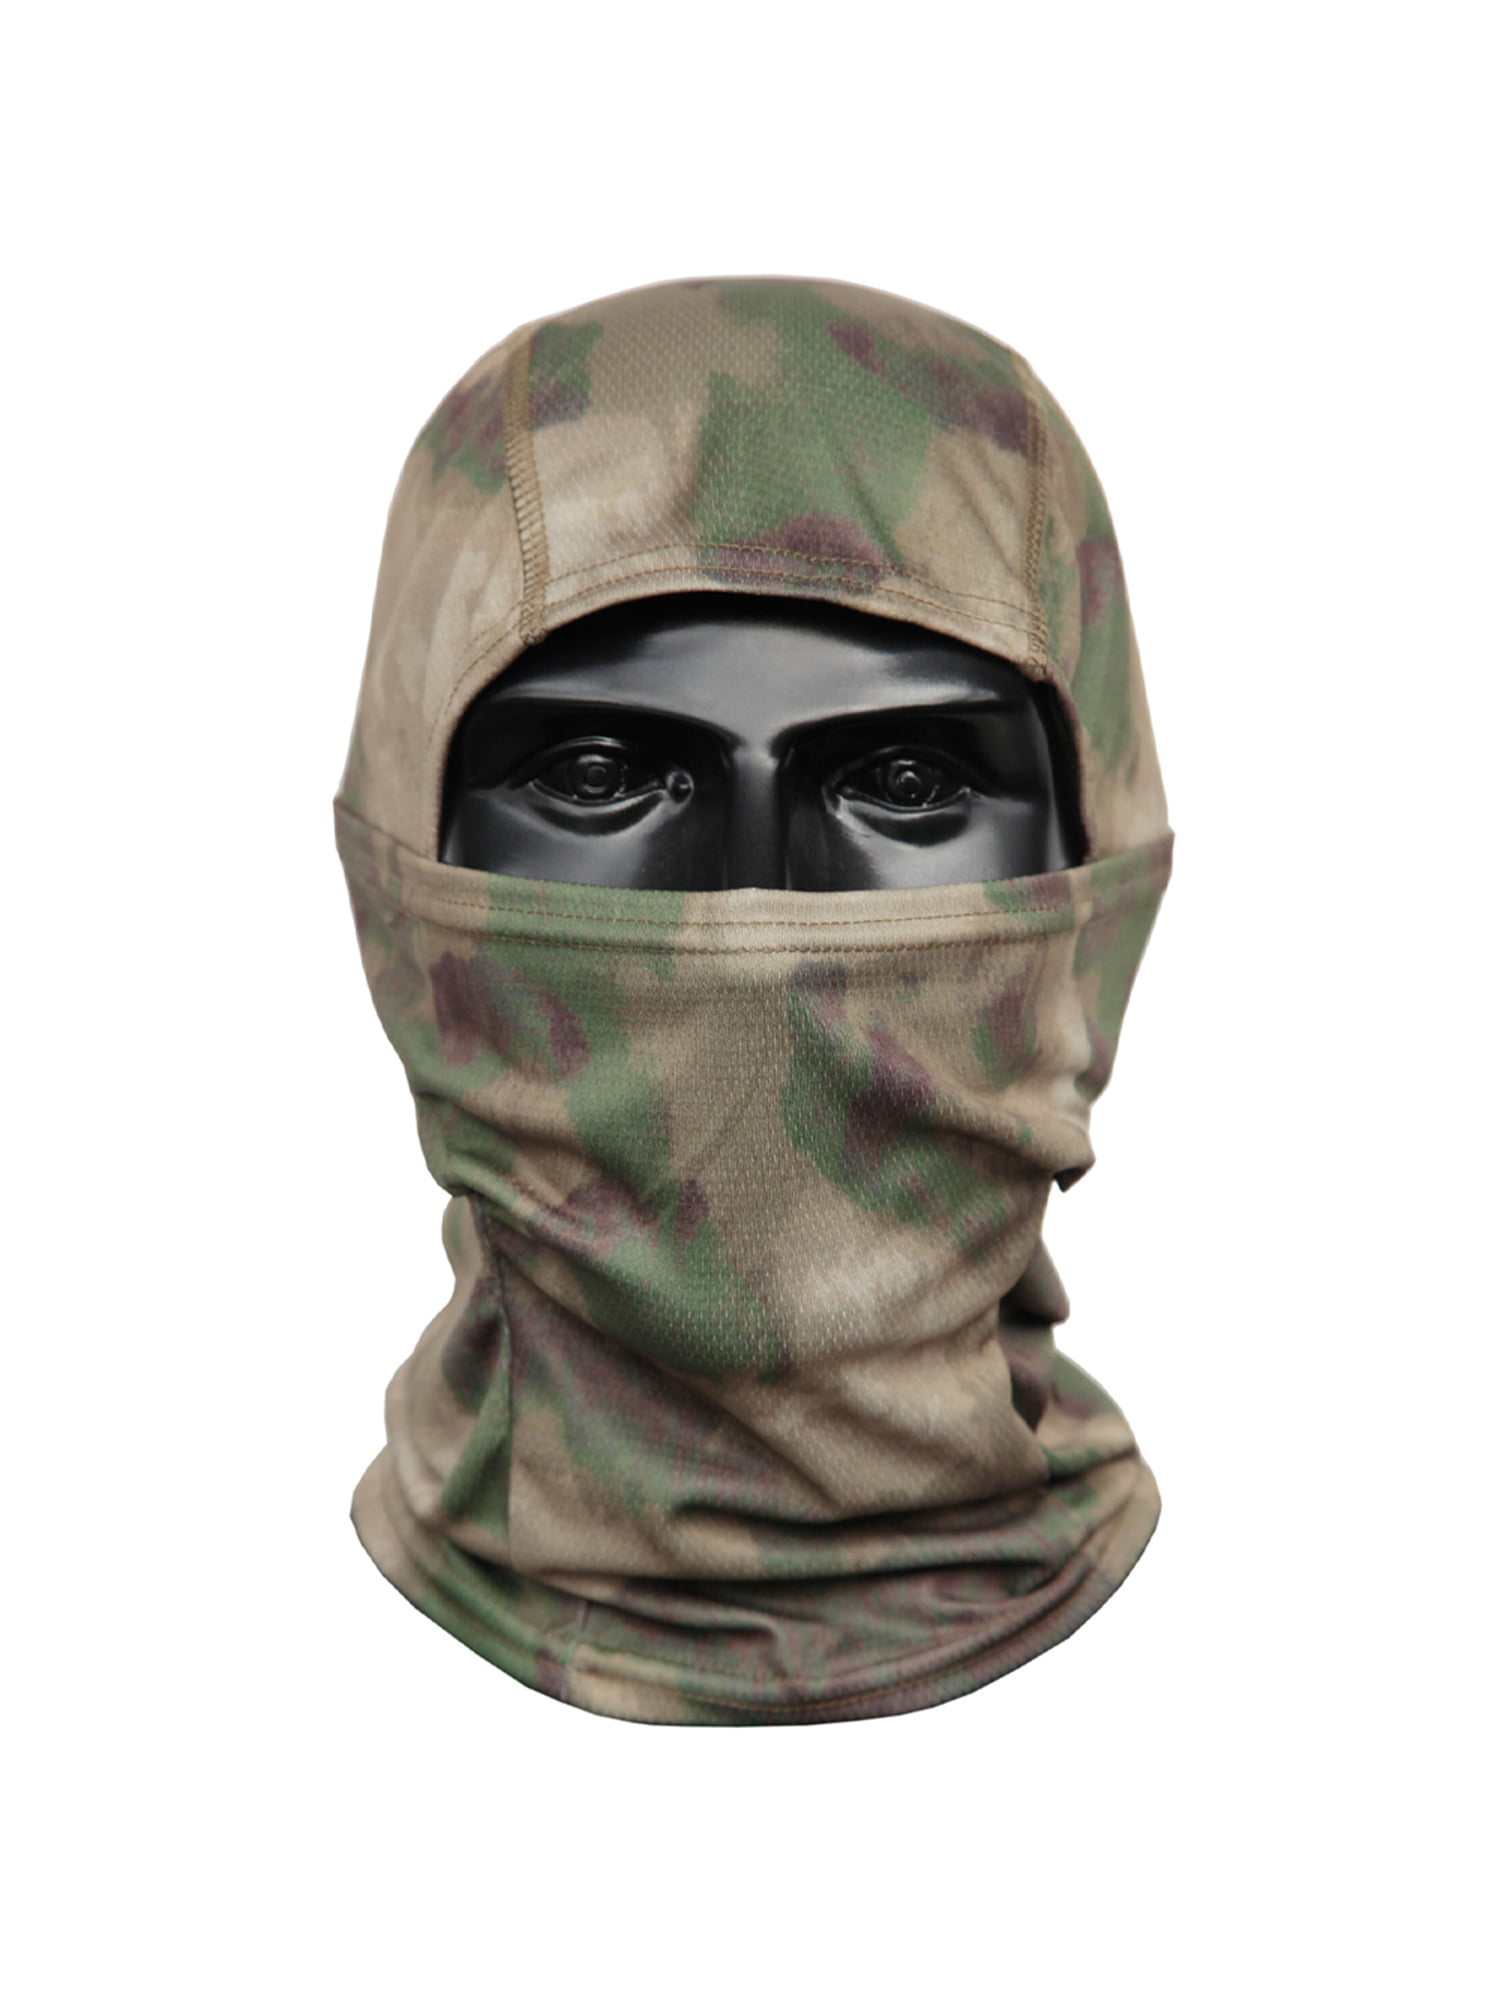 Details about   Mens Army Military Camouflage Hunting Balaclava Face Mask Sniper Hatwear Hats US 